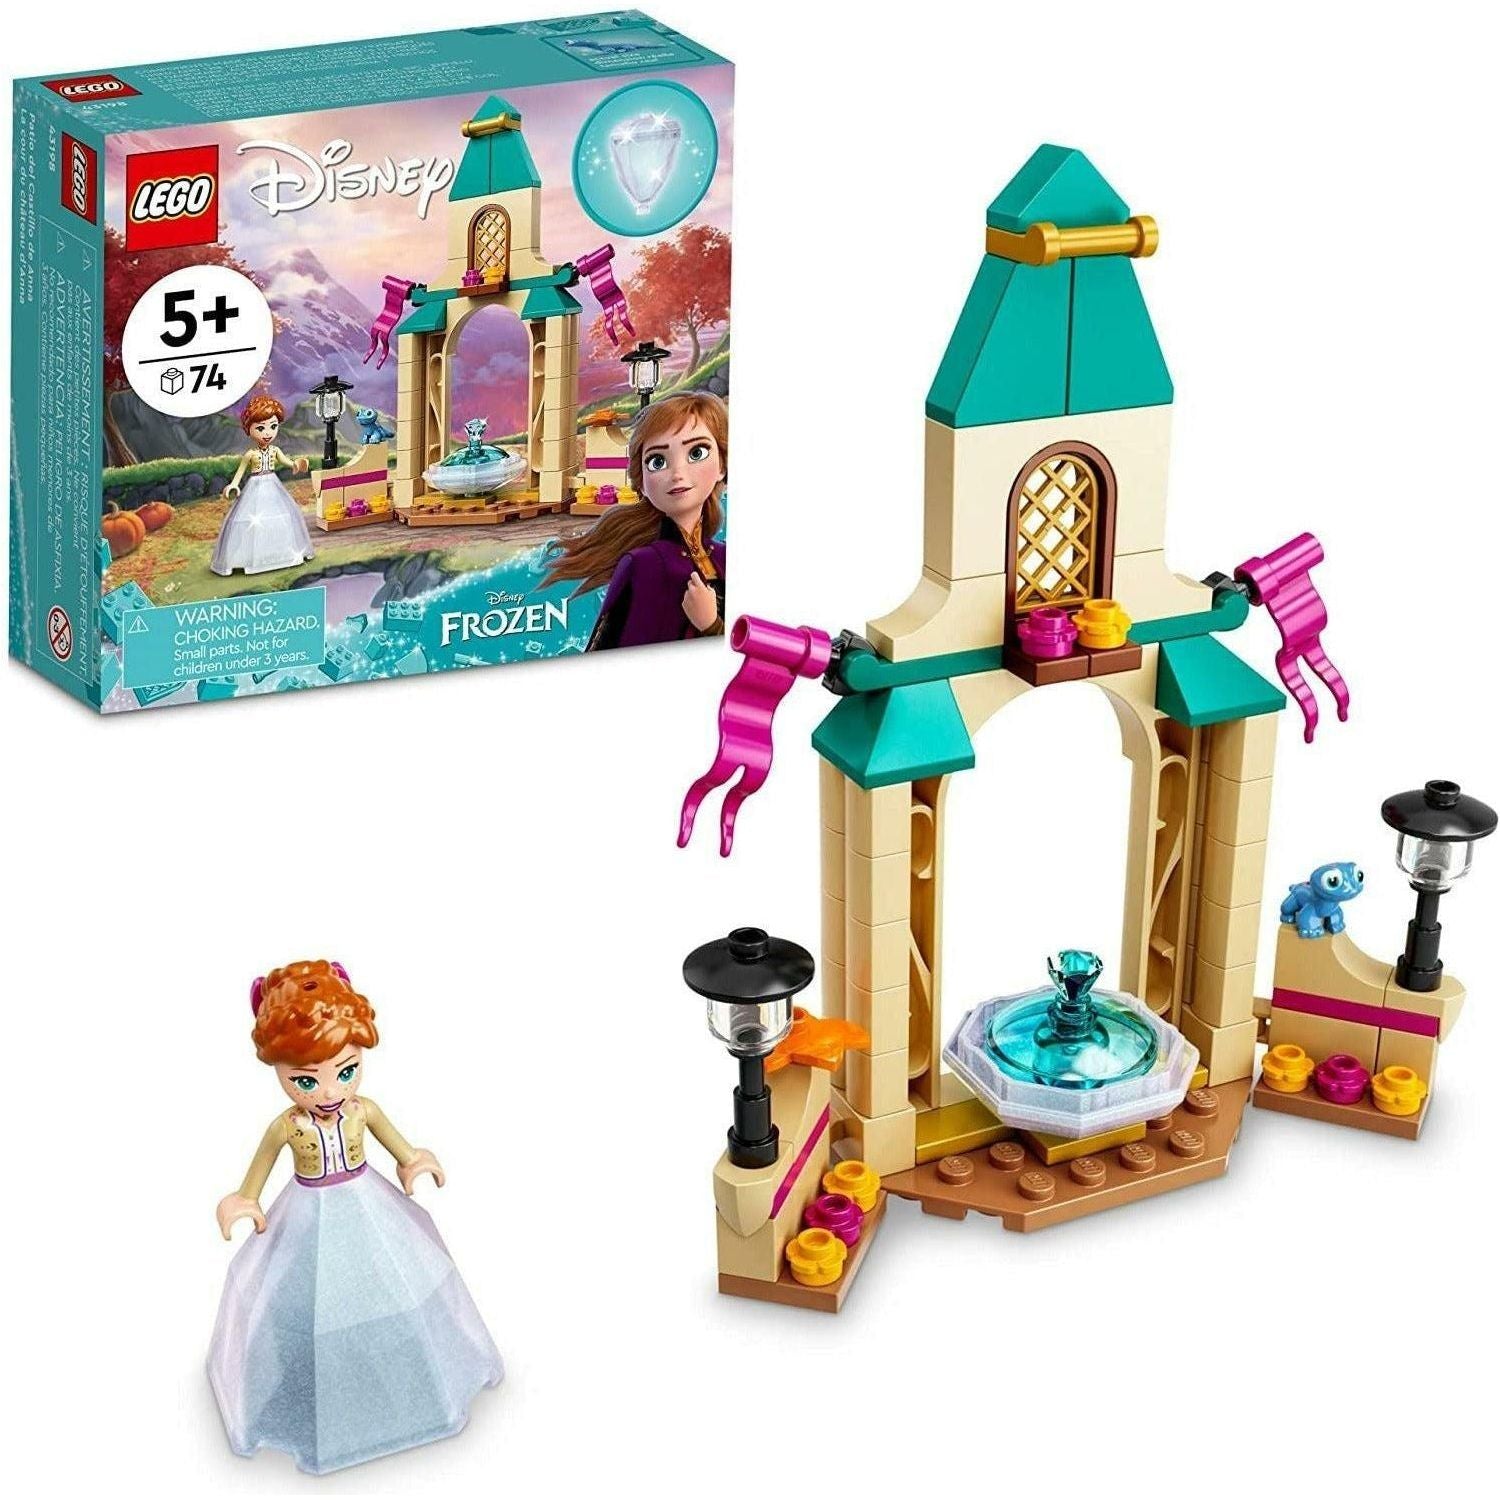 LEGO Disney Anna’s Castle Courtyard 43198 Building Kit; A Buildable Princess Toy Designed for Kids Aged 5+ (74 Pieces) - BumbleToys - 5-7 Years, Arabic Triangle Trading, Disney, Frozen, LEGO